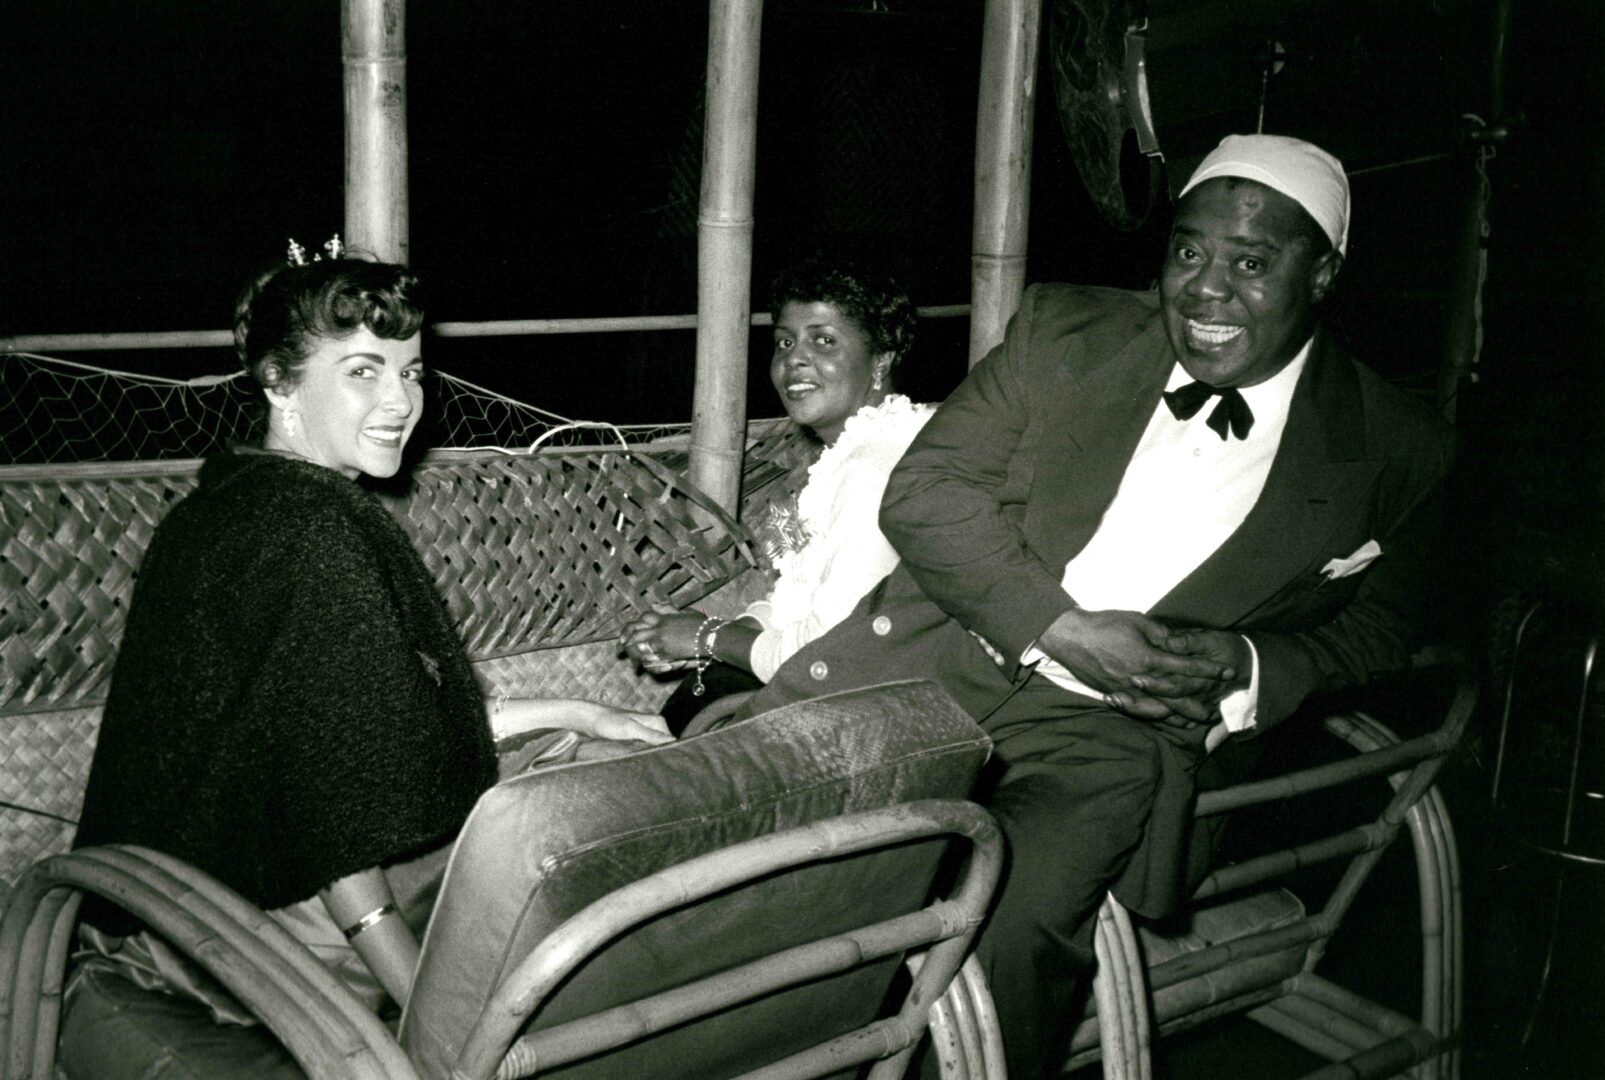 Milt Hinton Vicksburg, MS 1910–2000 New York City Lucille and Louis Armstrong with a friend, Honolulu, Hawaii, ca. 1954, 1954 Gelatin silver print Gift of Hank O'Neal and Shelley M. Sheir, 2023 2023.15 8 ½ in. x 13 in. (f) currently unframed FF19 Condition: checked